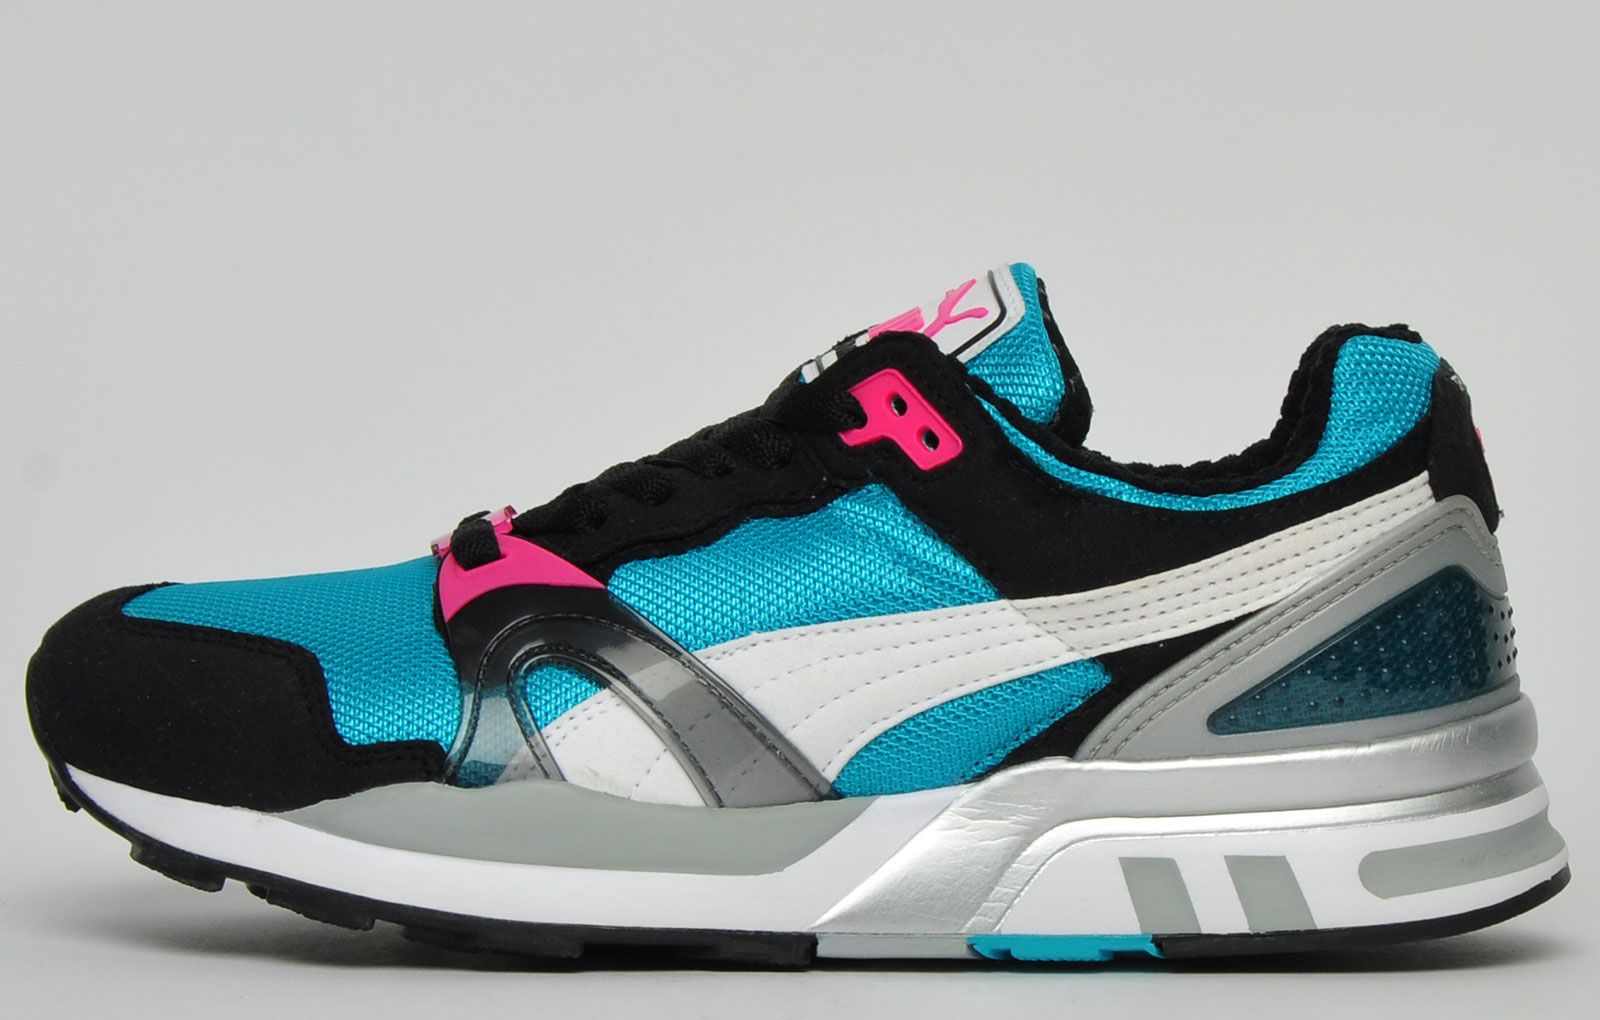 <p>Originally released in 1990, the Puma Trinomic was part of Puma’s early running range.</p> <p>The PUMA Trinomic XT2 Plus silhouette features a mix of synthetic suede, mesh and other materials providing a stylish and practical trainer that won’t let you down. Designed with an integrated lacing system and a forefoot saddle that adds durability and support for long lasting comfort, accompanied by a reinforced heel to provide a safe and secure fit.</p> <p>Designed with a treaded bottom for optimal grip over a variety of surfaces and with the visual Puma Trinomic clearly visible in the sole this is a cool retro running trainer which delivers on all fronts no matter whether you’re in the gym or just using for on trend casual wear.</p> <p>- Textile/synthetic suede upper</p> <p>- Padded tongue and heel</p> <p>- Eva midsole for increased cushioning</p> <p>- Durable outsole with flex grooves for enhanced grip</p> <p>- Trinomic cushioning visible in sole</p> <p>- Puma branding throughout<br></p>